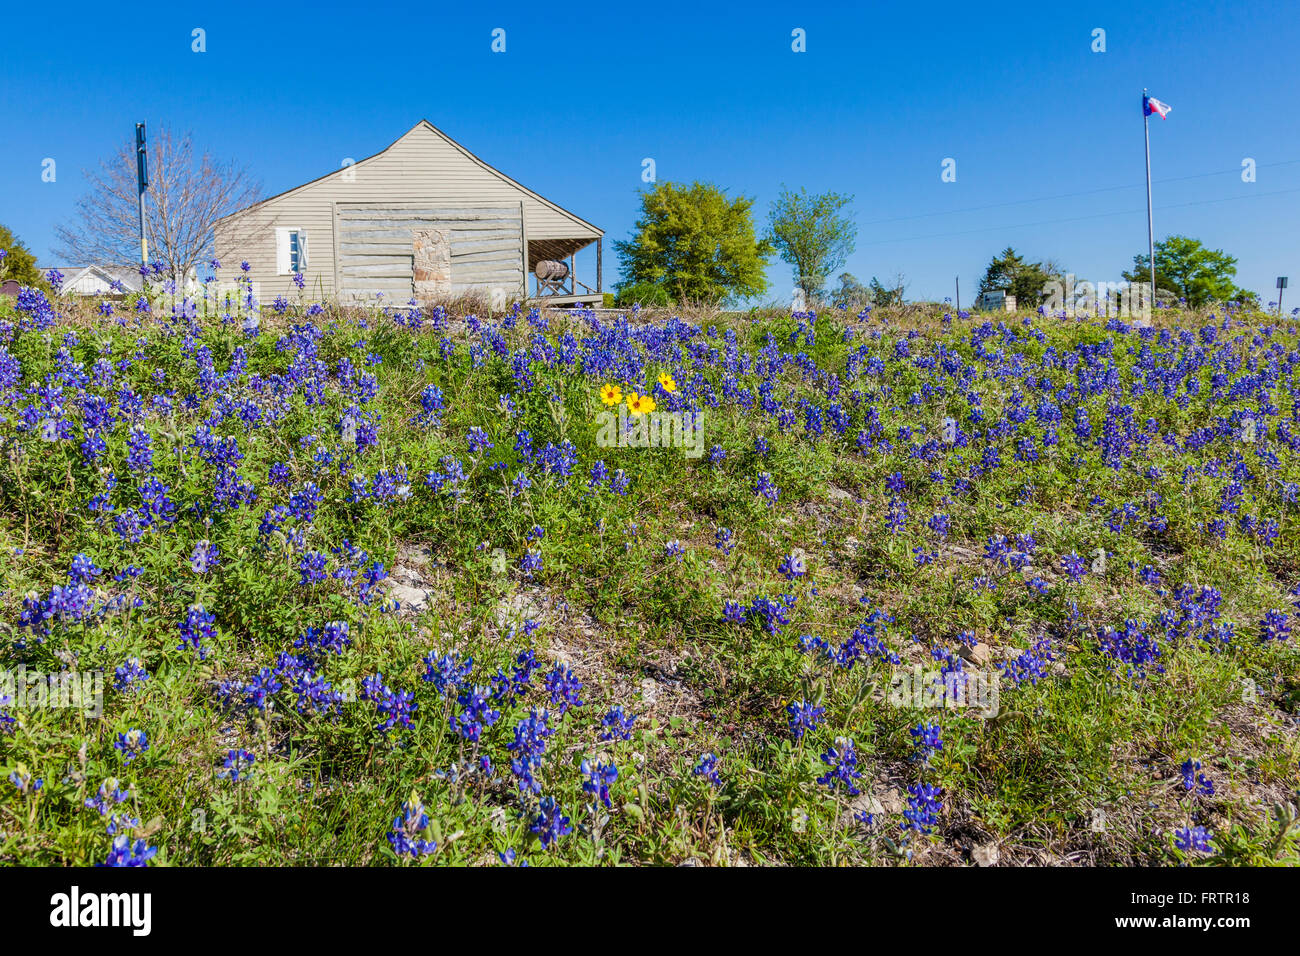 Bluebonnets with Cabins and ruins at Old Baylor Park in Independence, Texas. Stock Photo